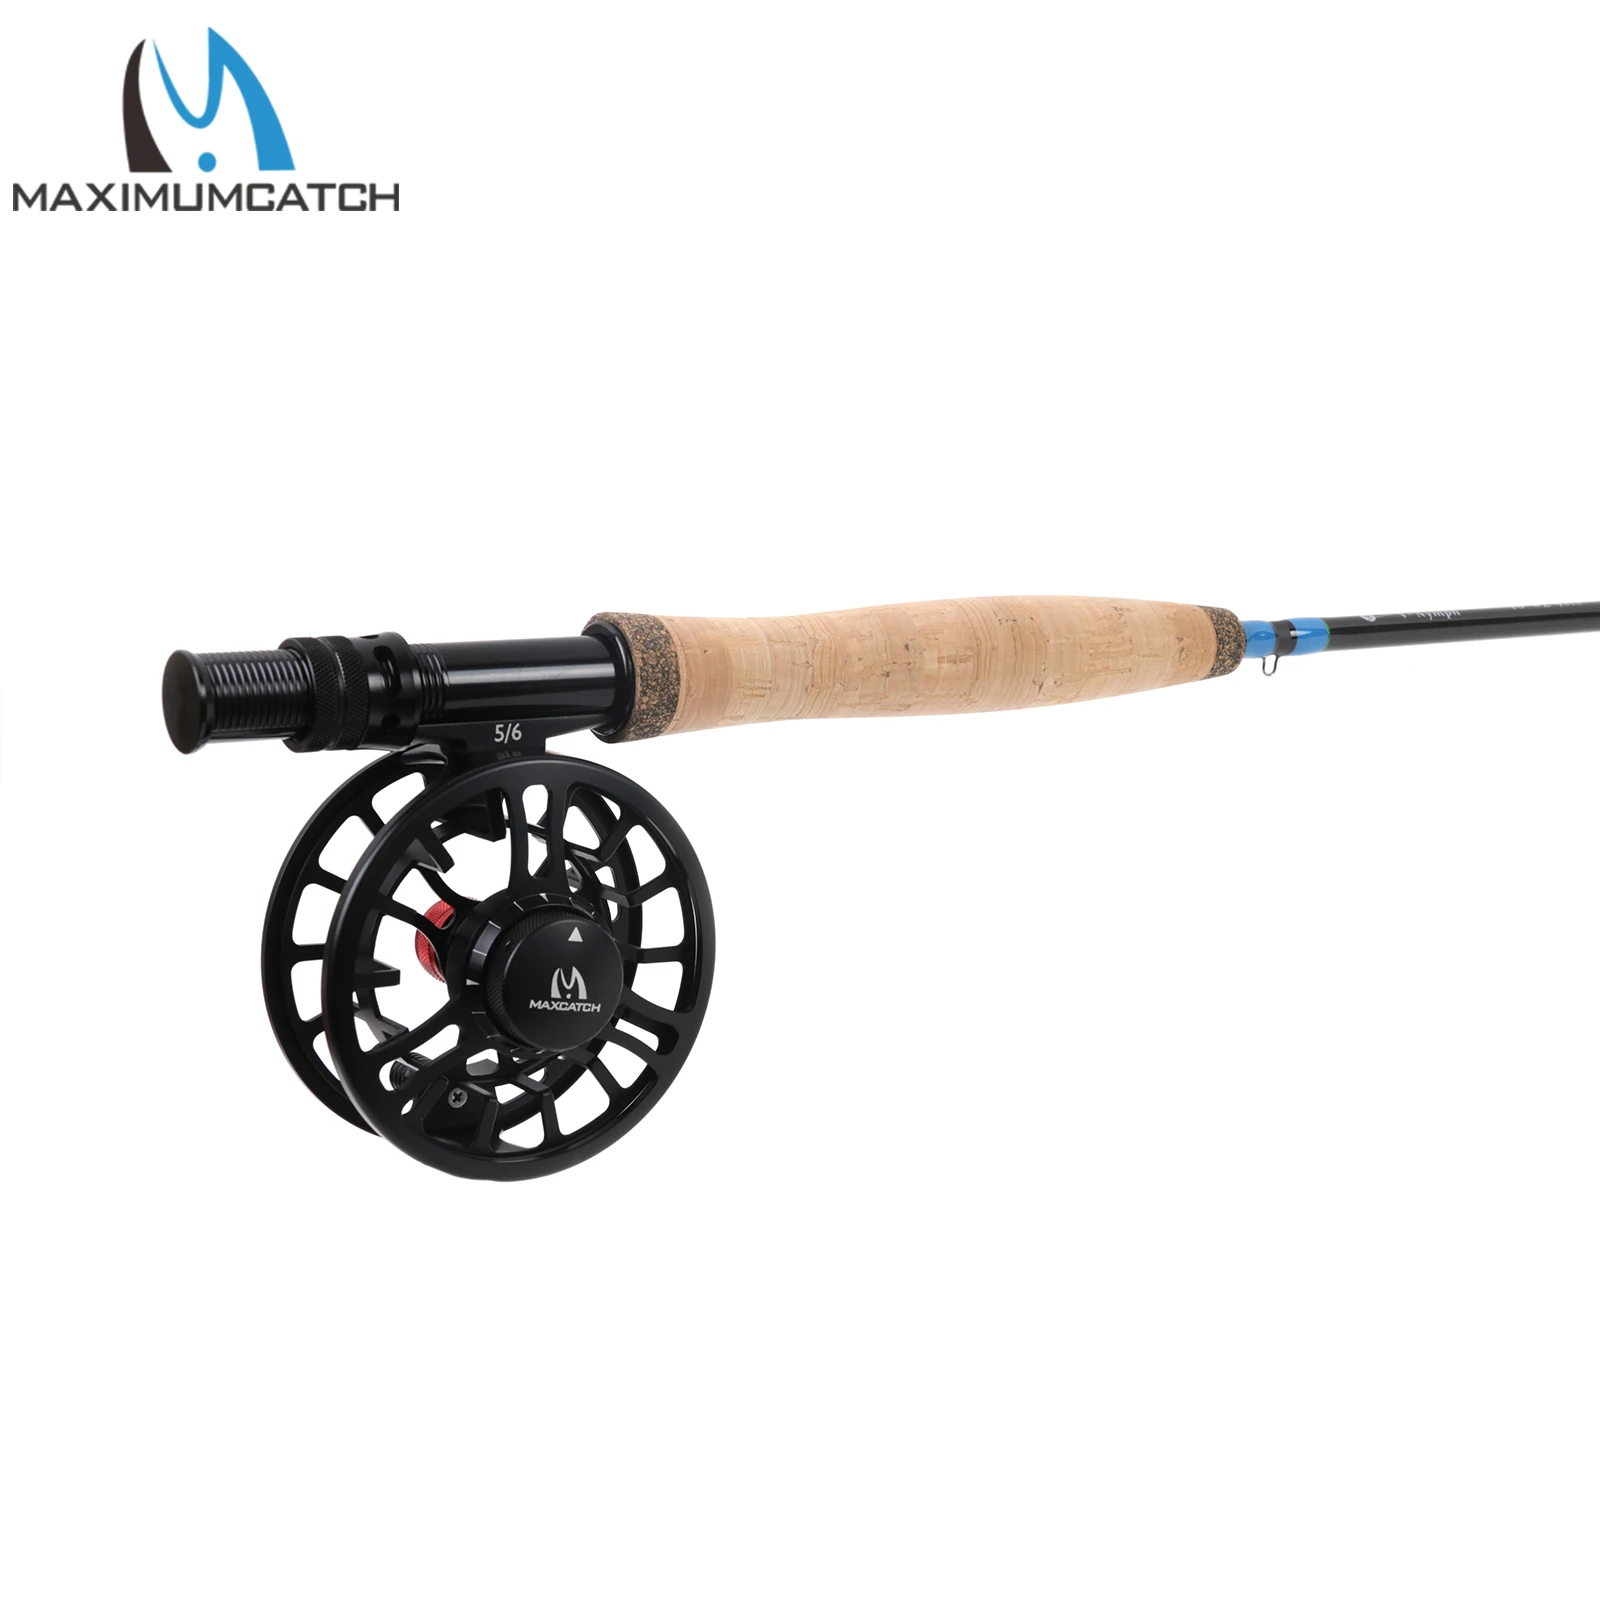 Maximumcatch 10FT-11FT 2/3/4WT 4Sec Nymph Fly Fishing Rod IM10 Graphite Carbon Fiber Fast Action Fly Rod with Nymph Line enlarge